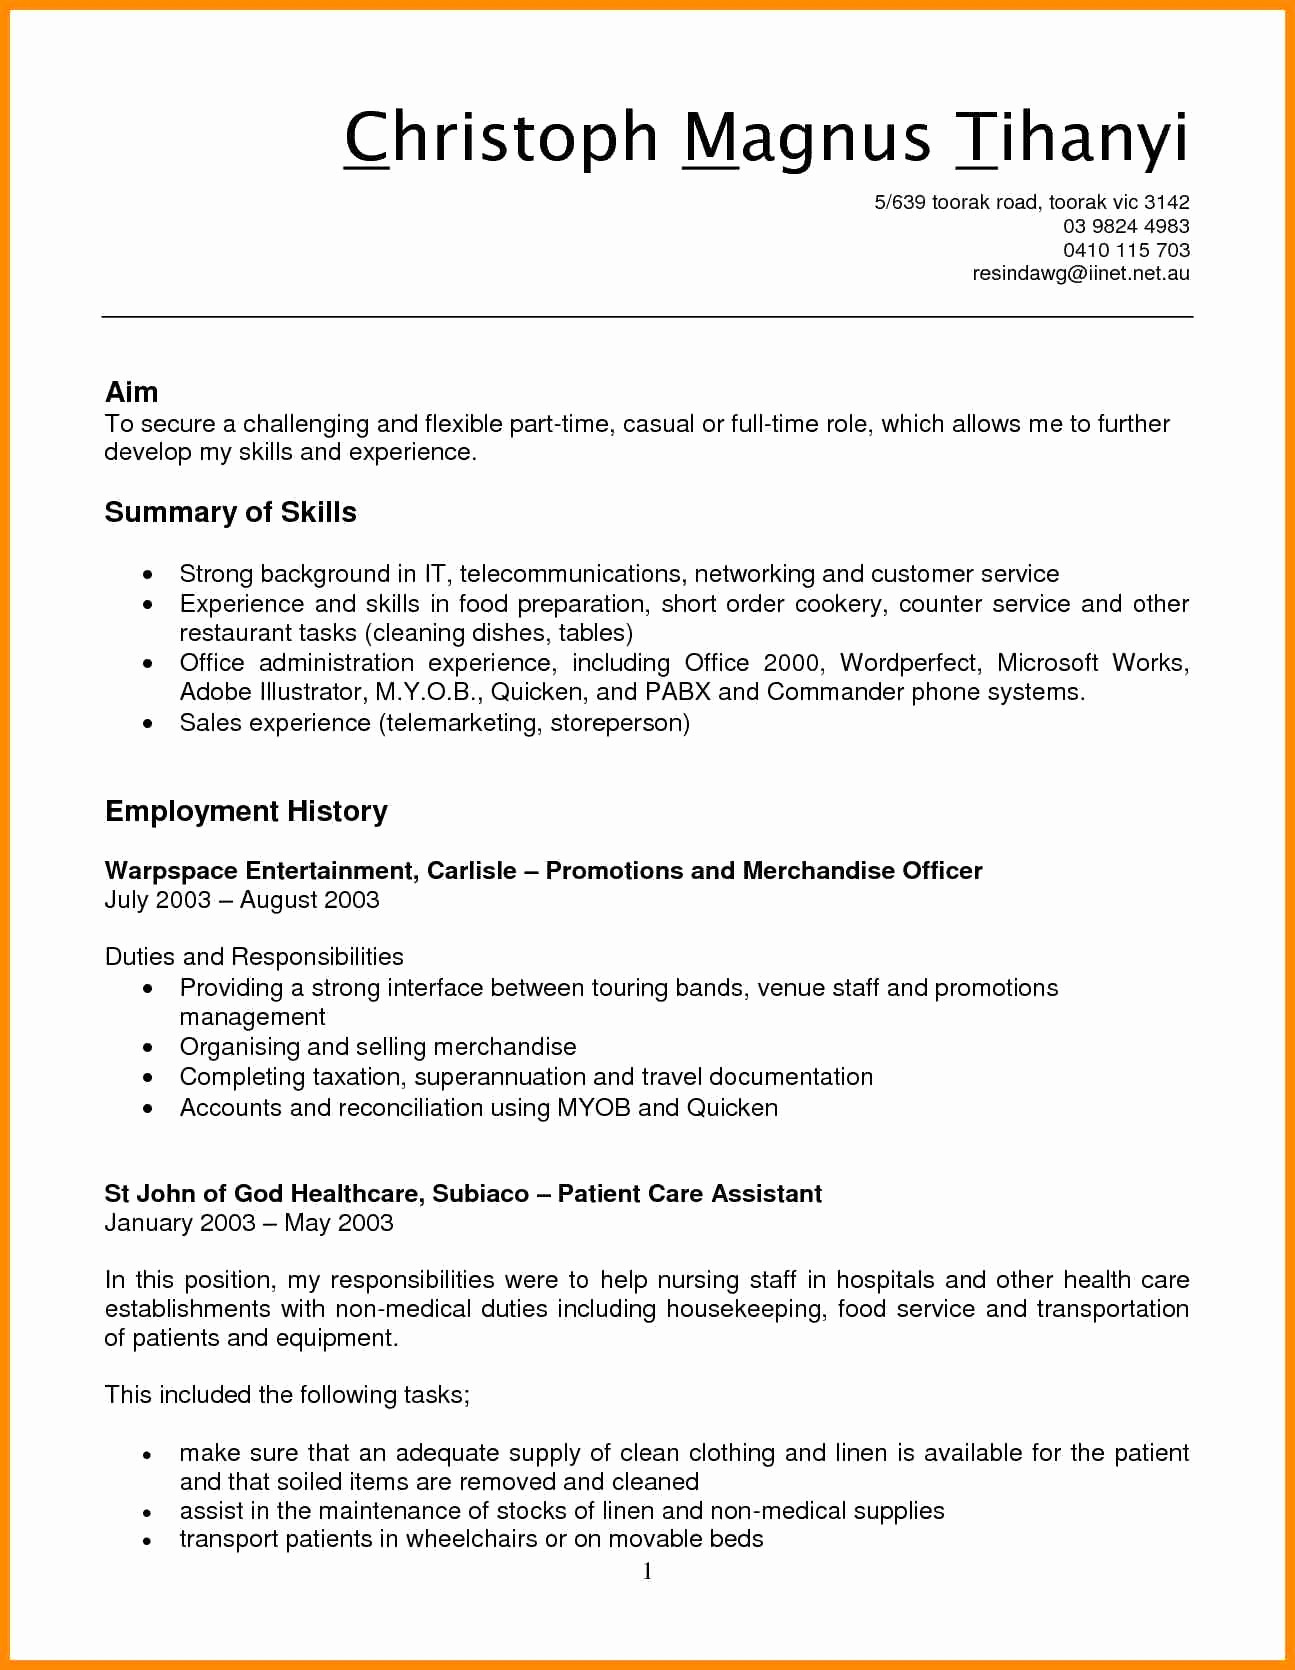 Sample Resume for Office Staff without Experience 12 13 Medical Office assistant Resumes Samples